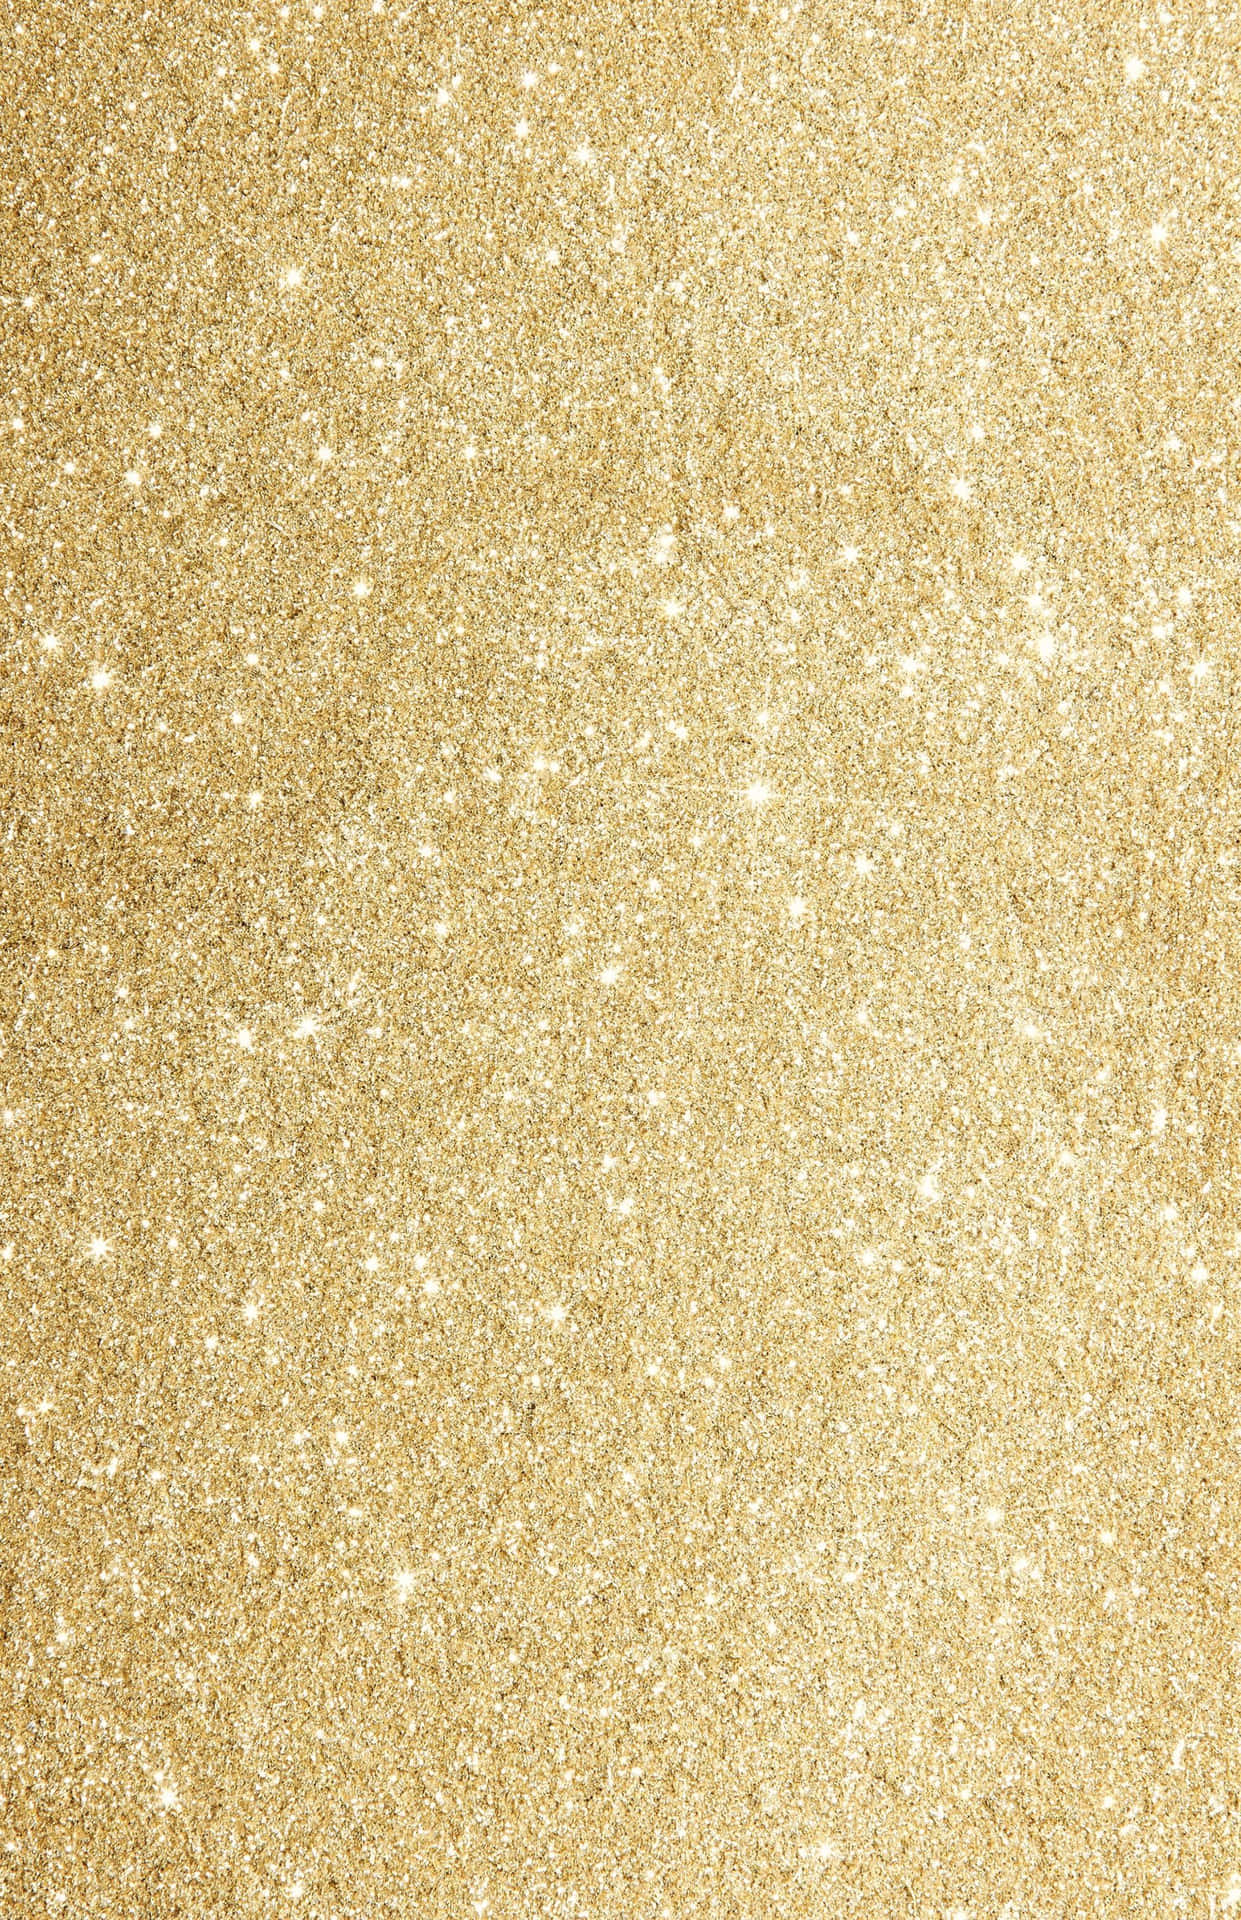 Purified Gold Glitter Picture